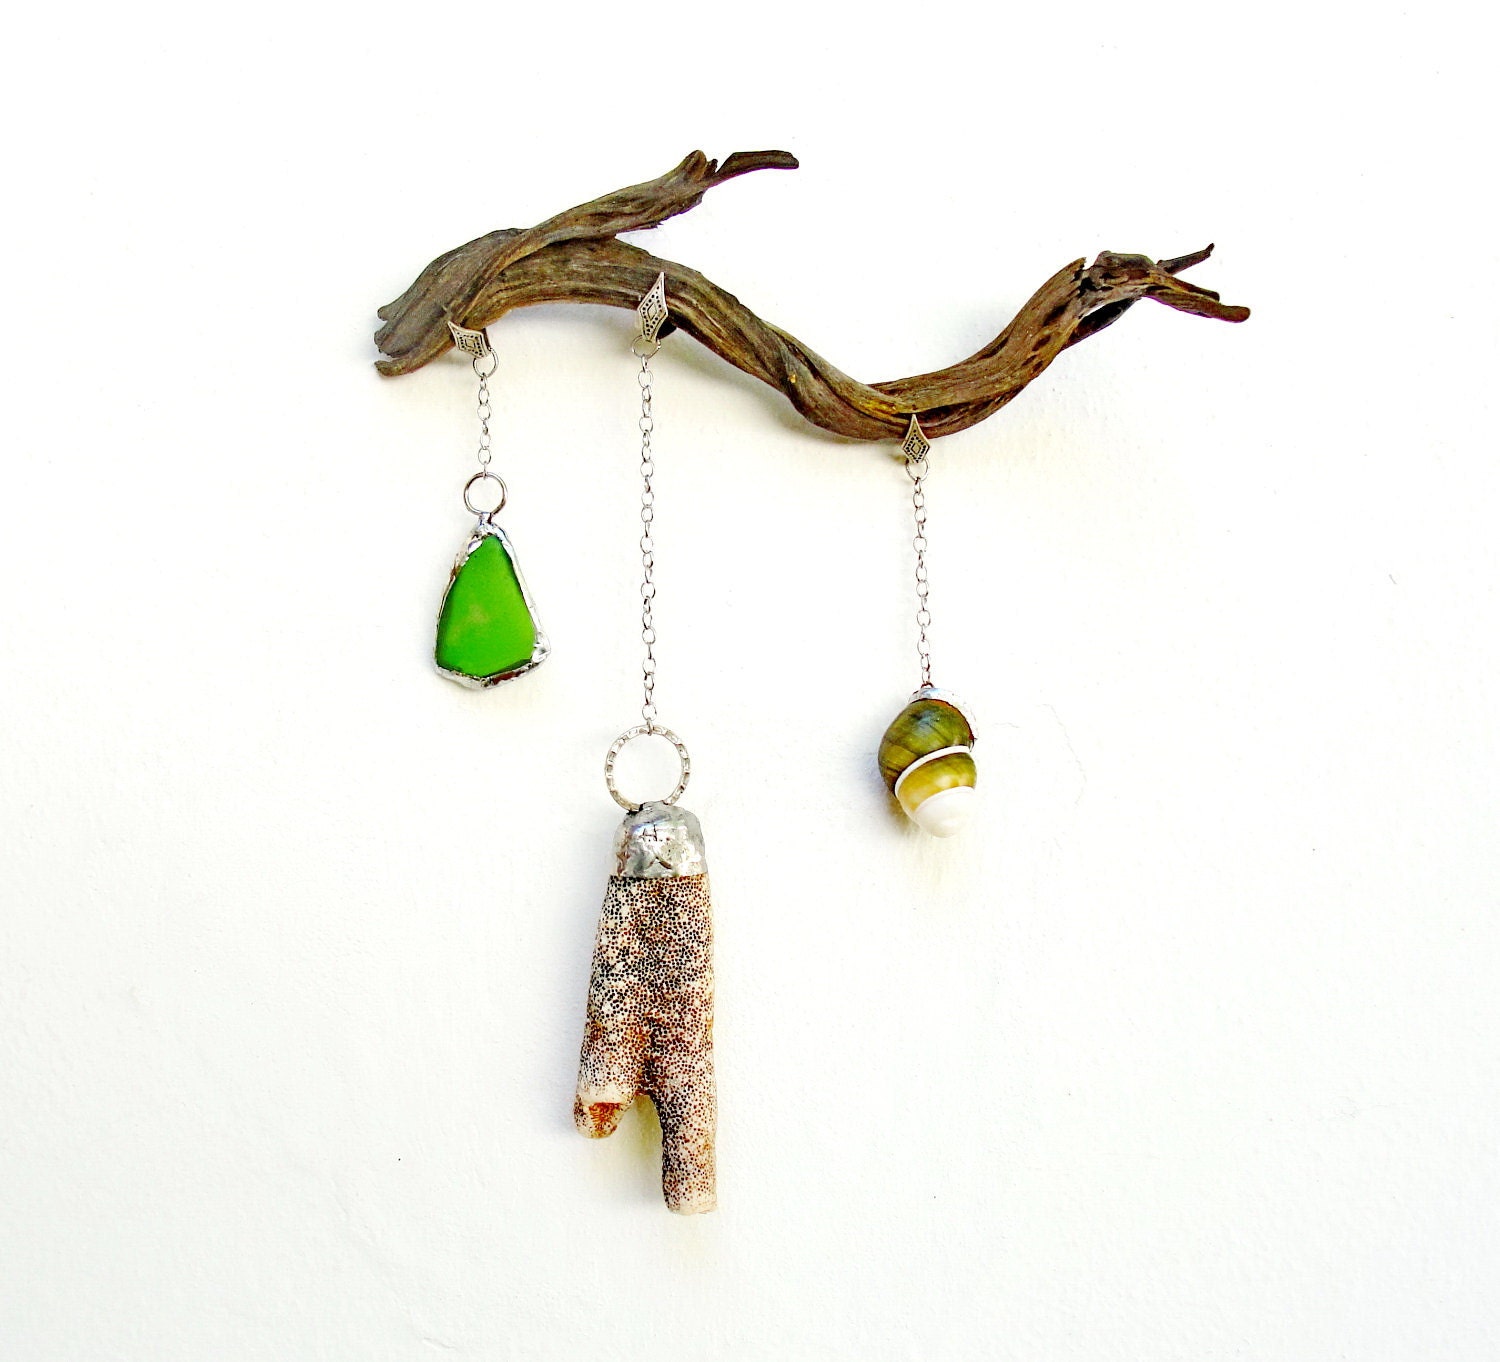 Beach Finds Installation - Driftwood, Seaglass, Coral, Shell  - Wall Hanging - GiftsandStars